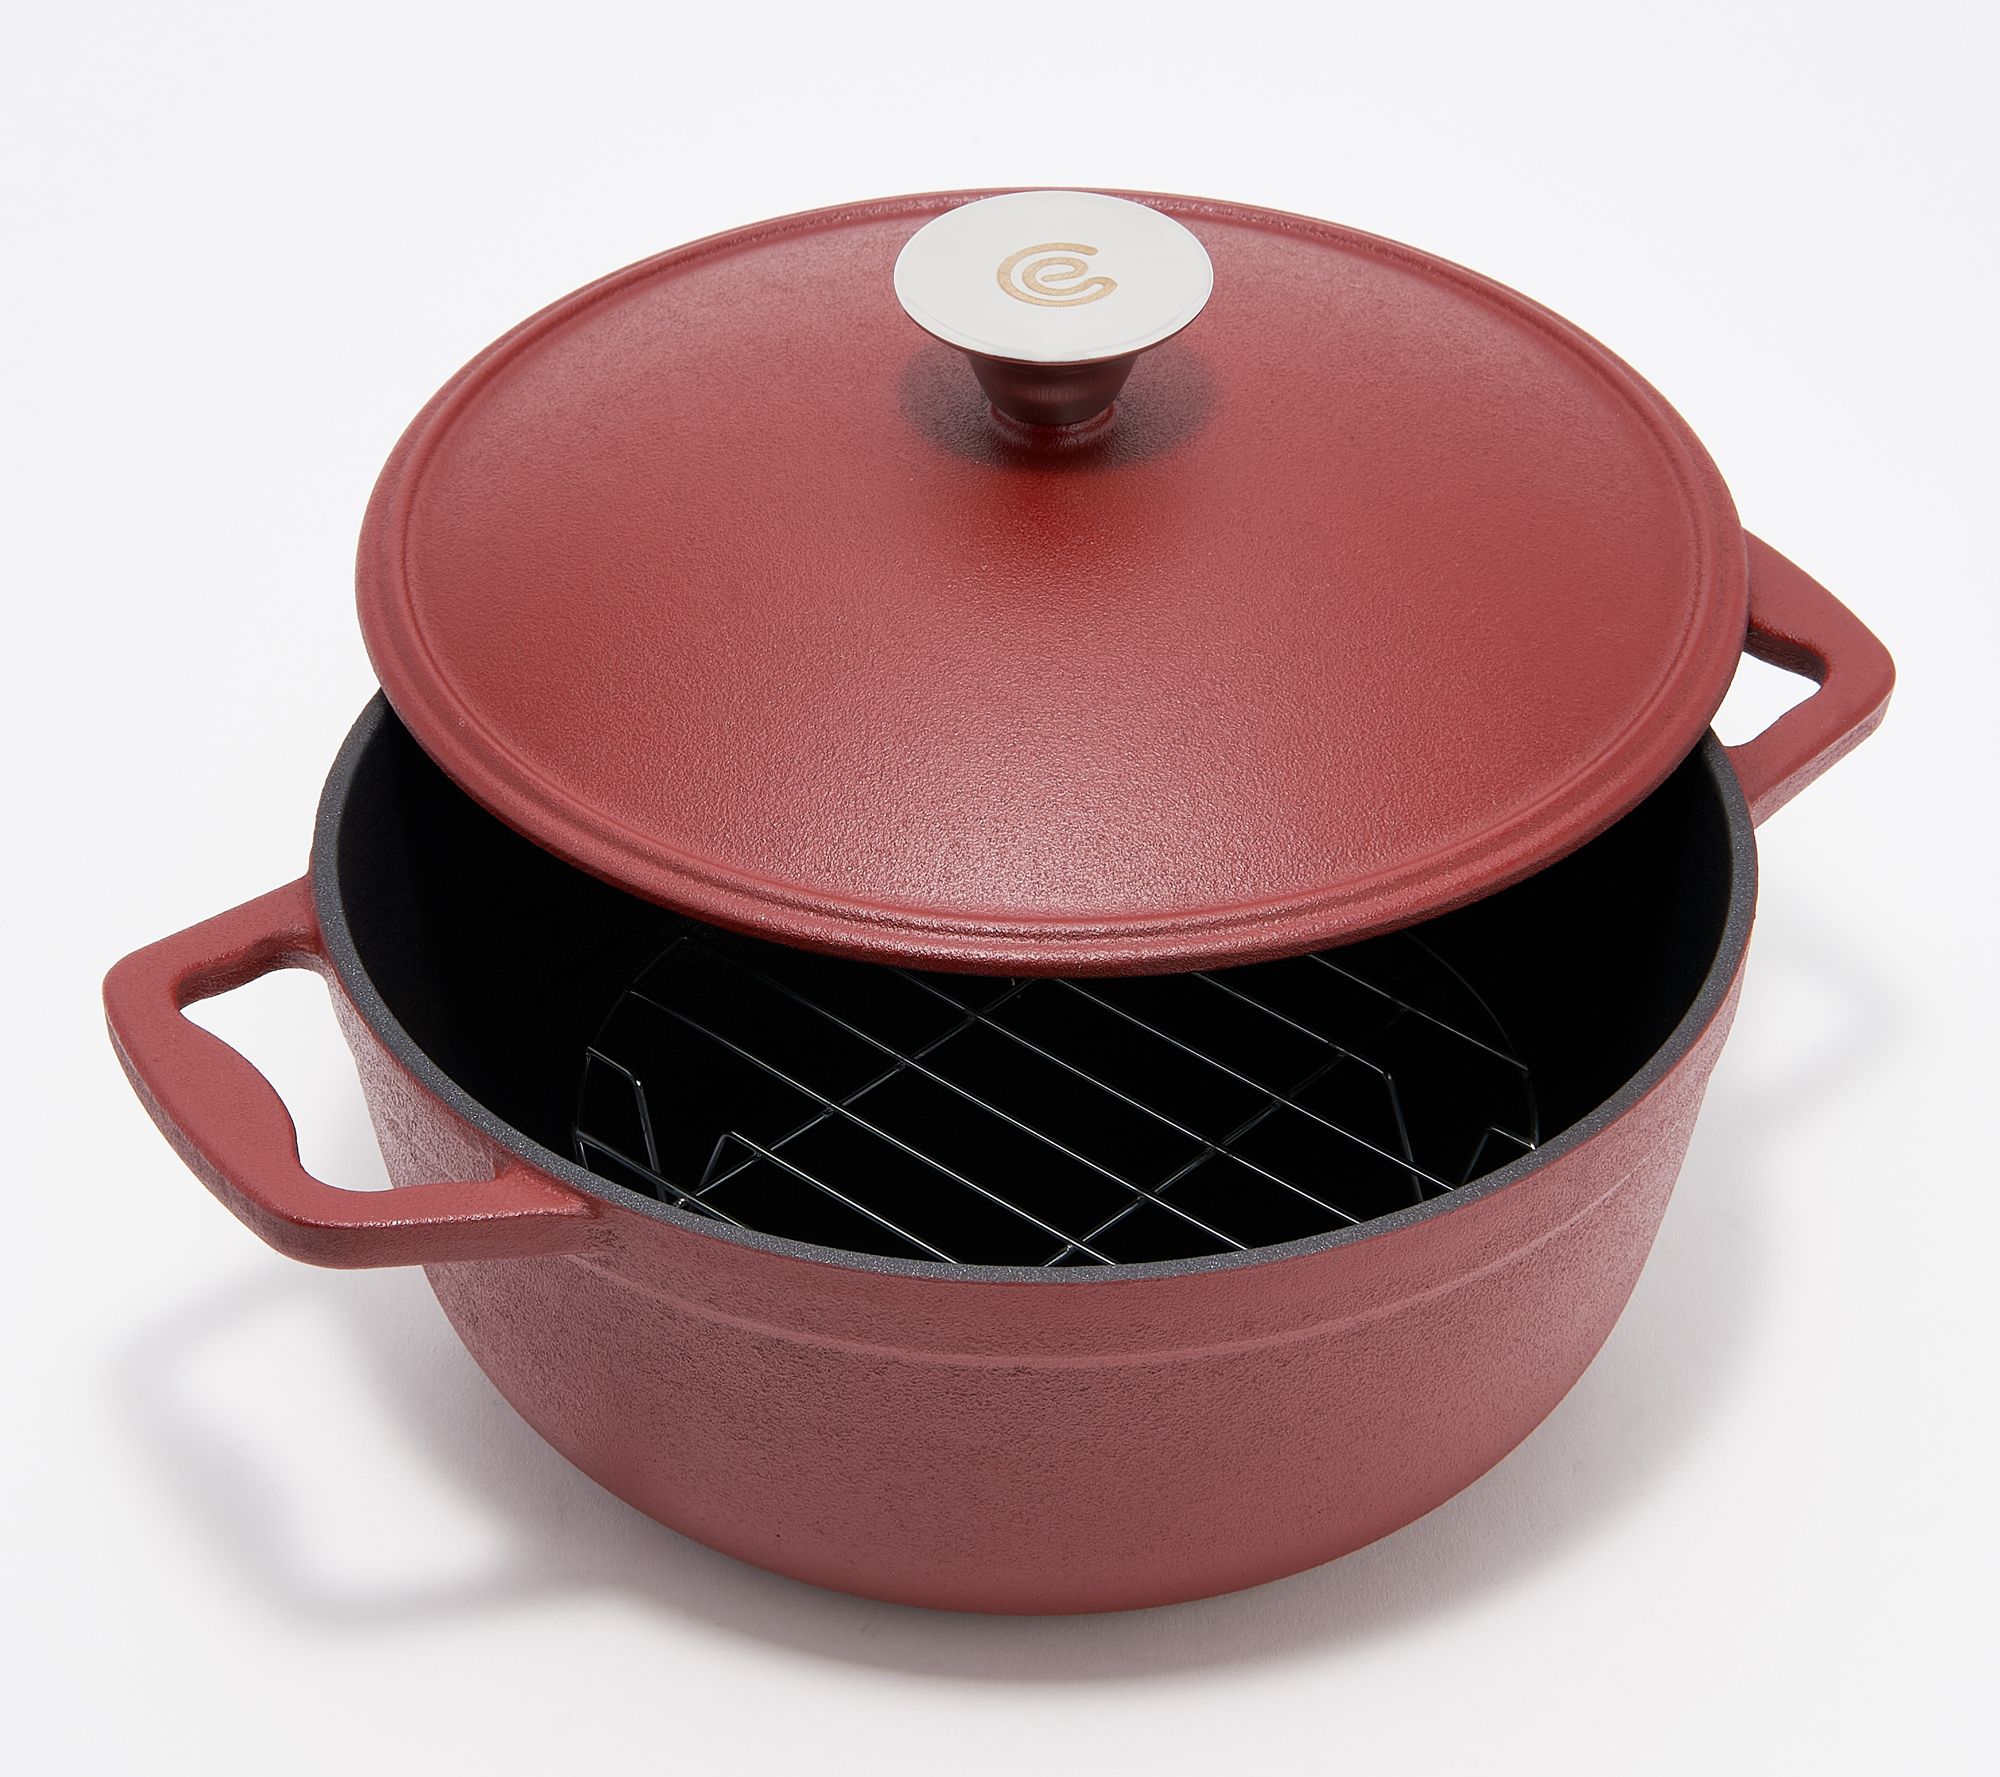 Nutrichef 5 qt Iron Dutch Oven, Red, & 11 in Square Cast Iron Skillet, Red